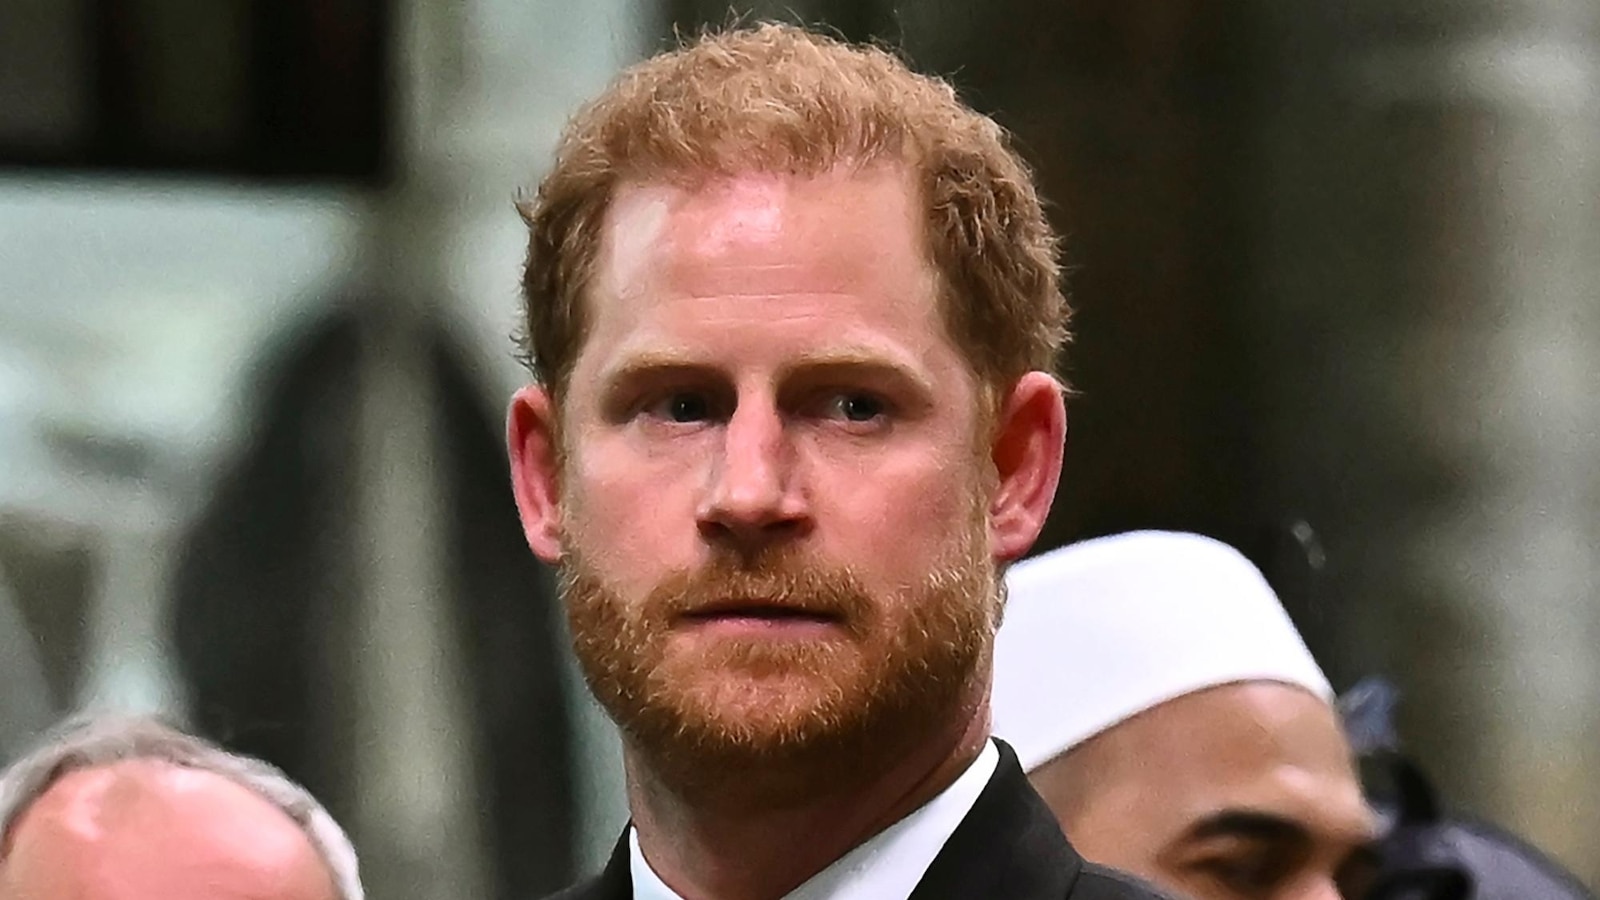 Prince Harry reaches settlement in phone hacking case against UK tabloid publisher